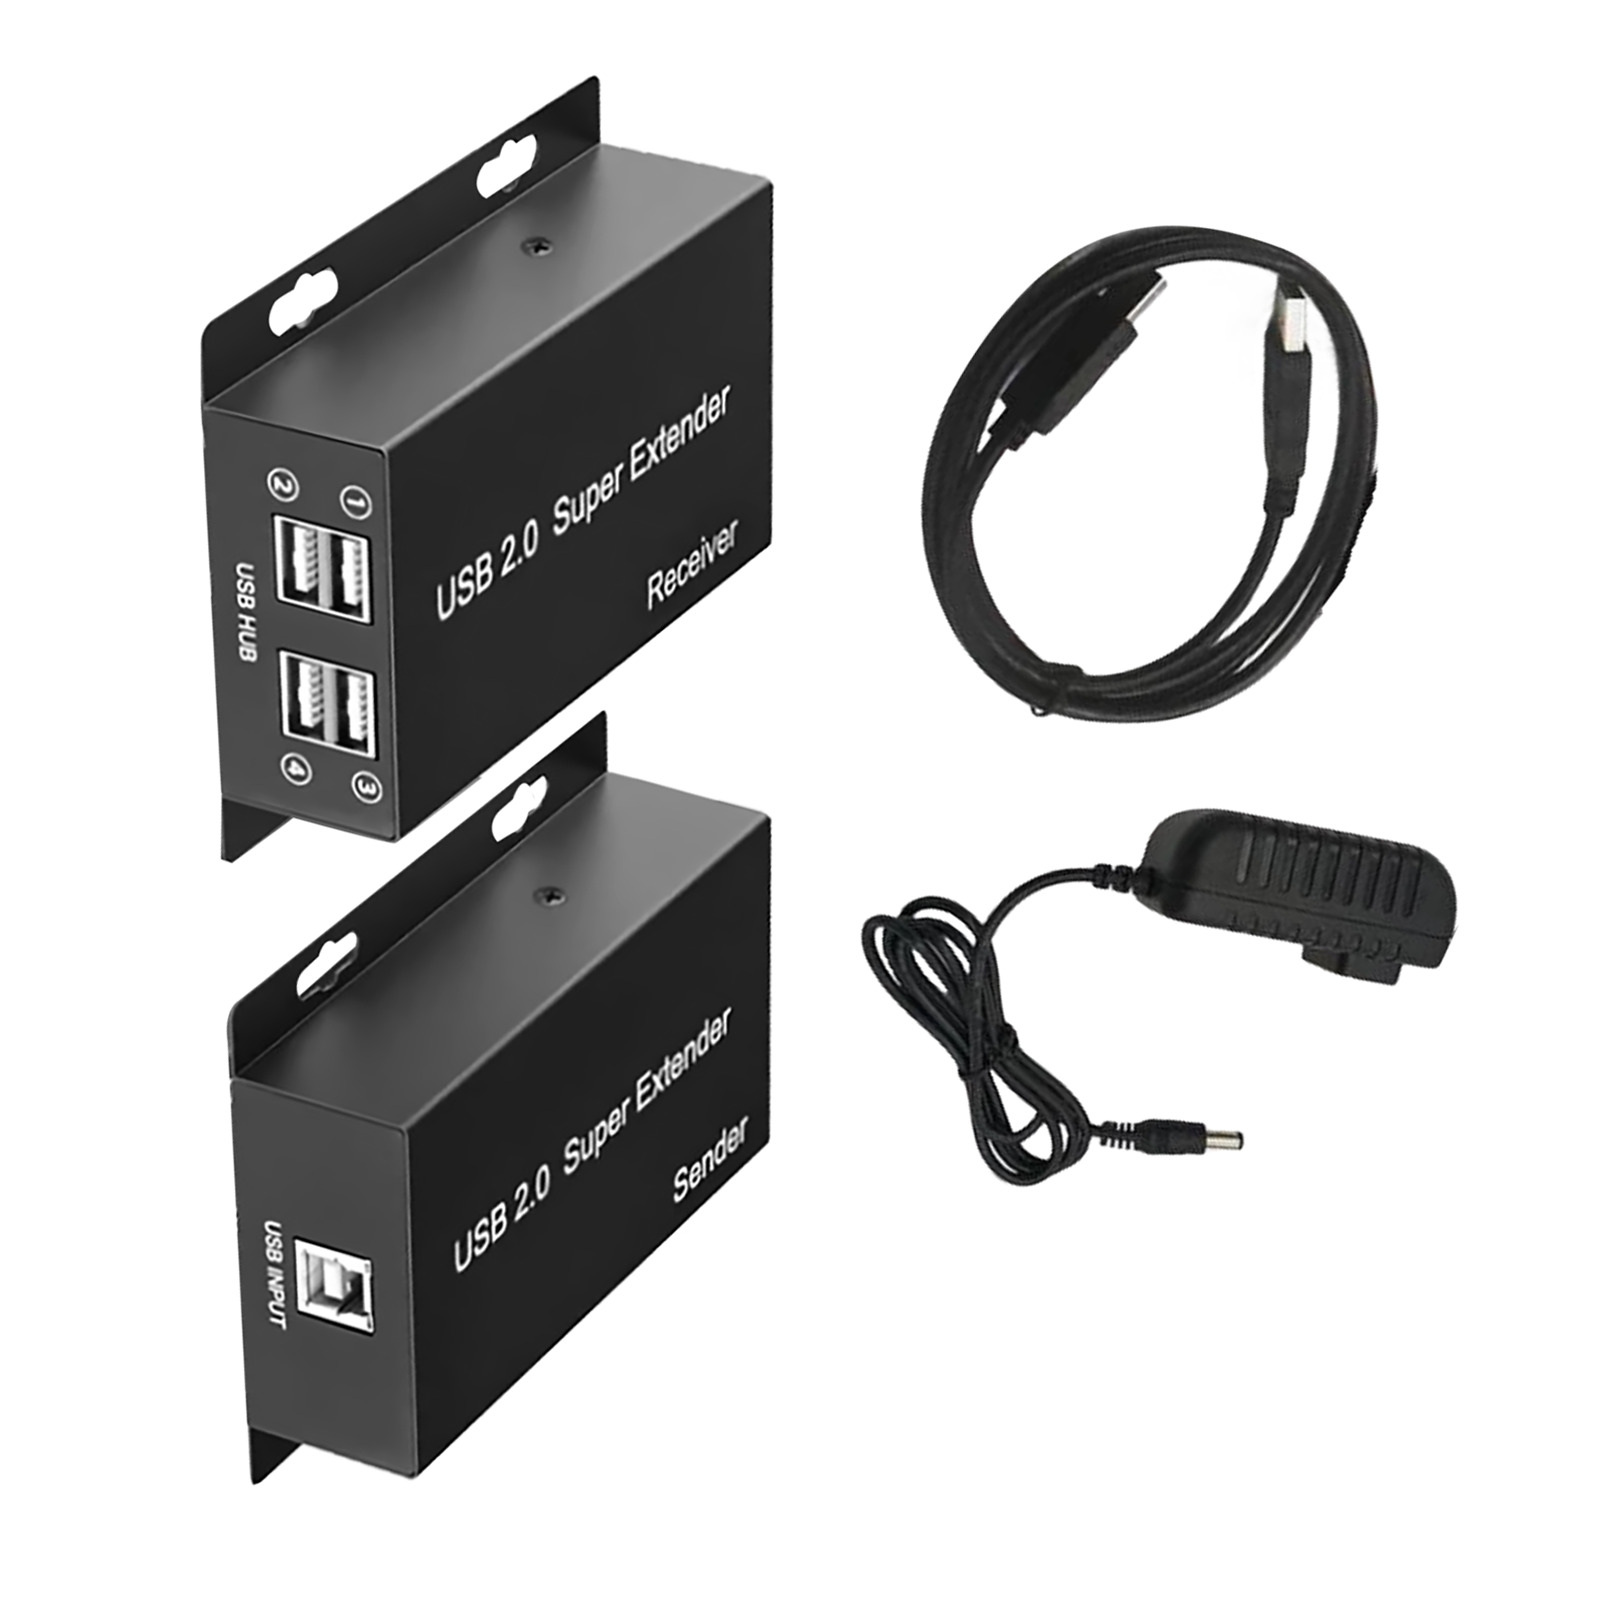 USB2.0 Hub Extender over Ethernet Rj45 Cat5e/6/7 Cable to 50M Extension Transmit